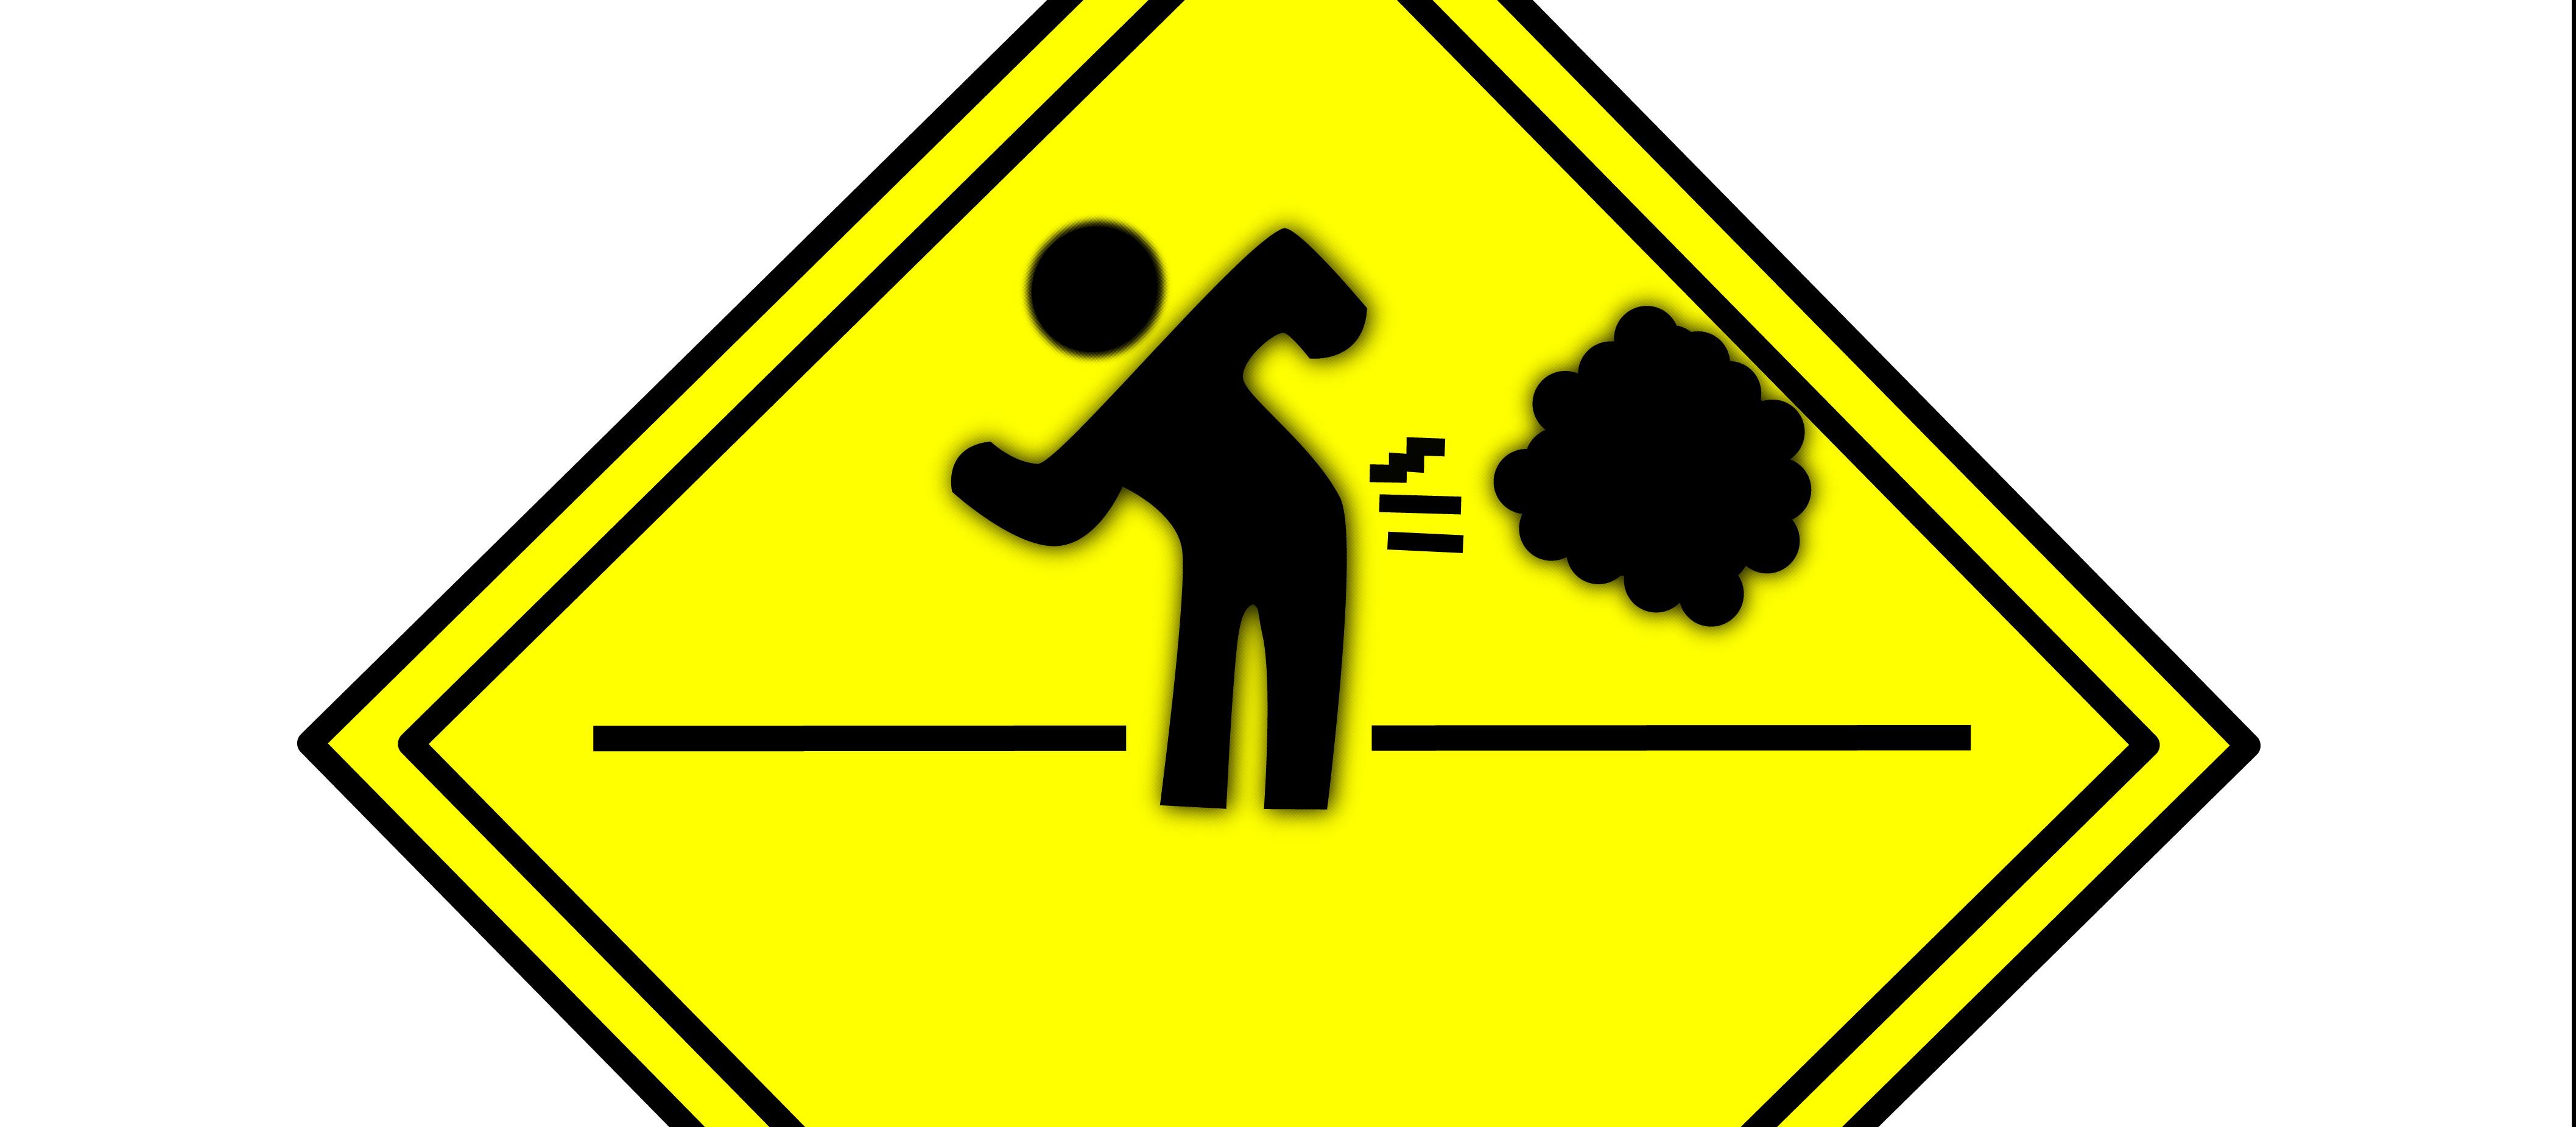 Farting sign